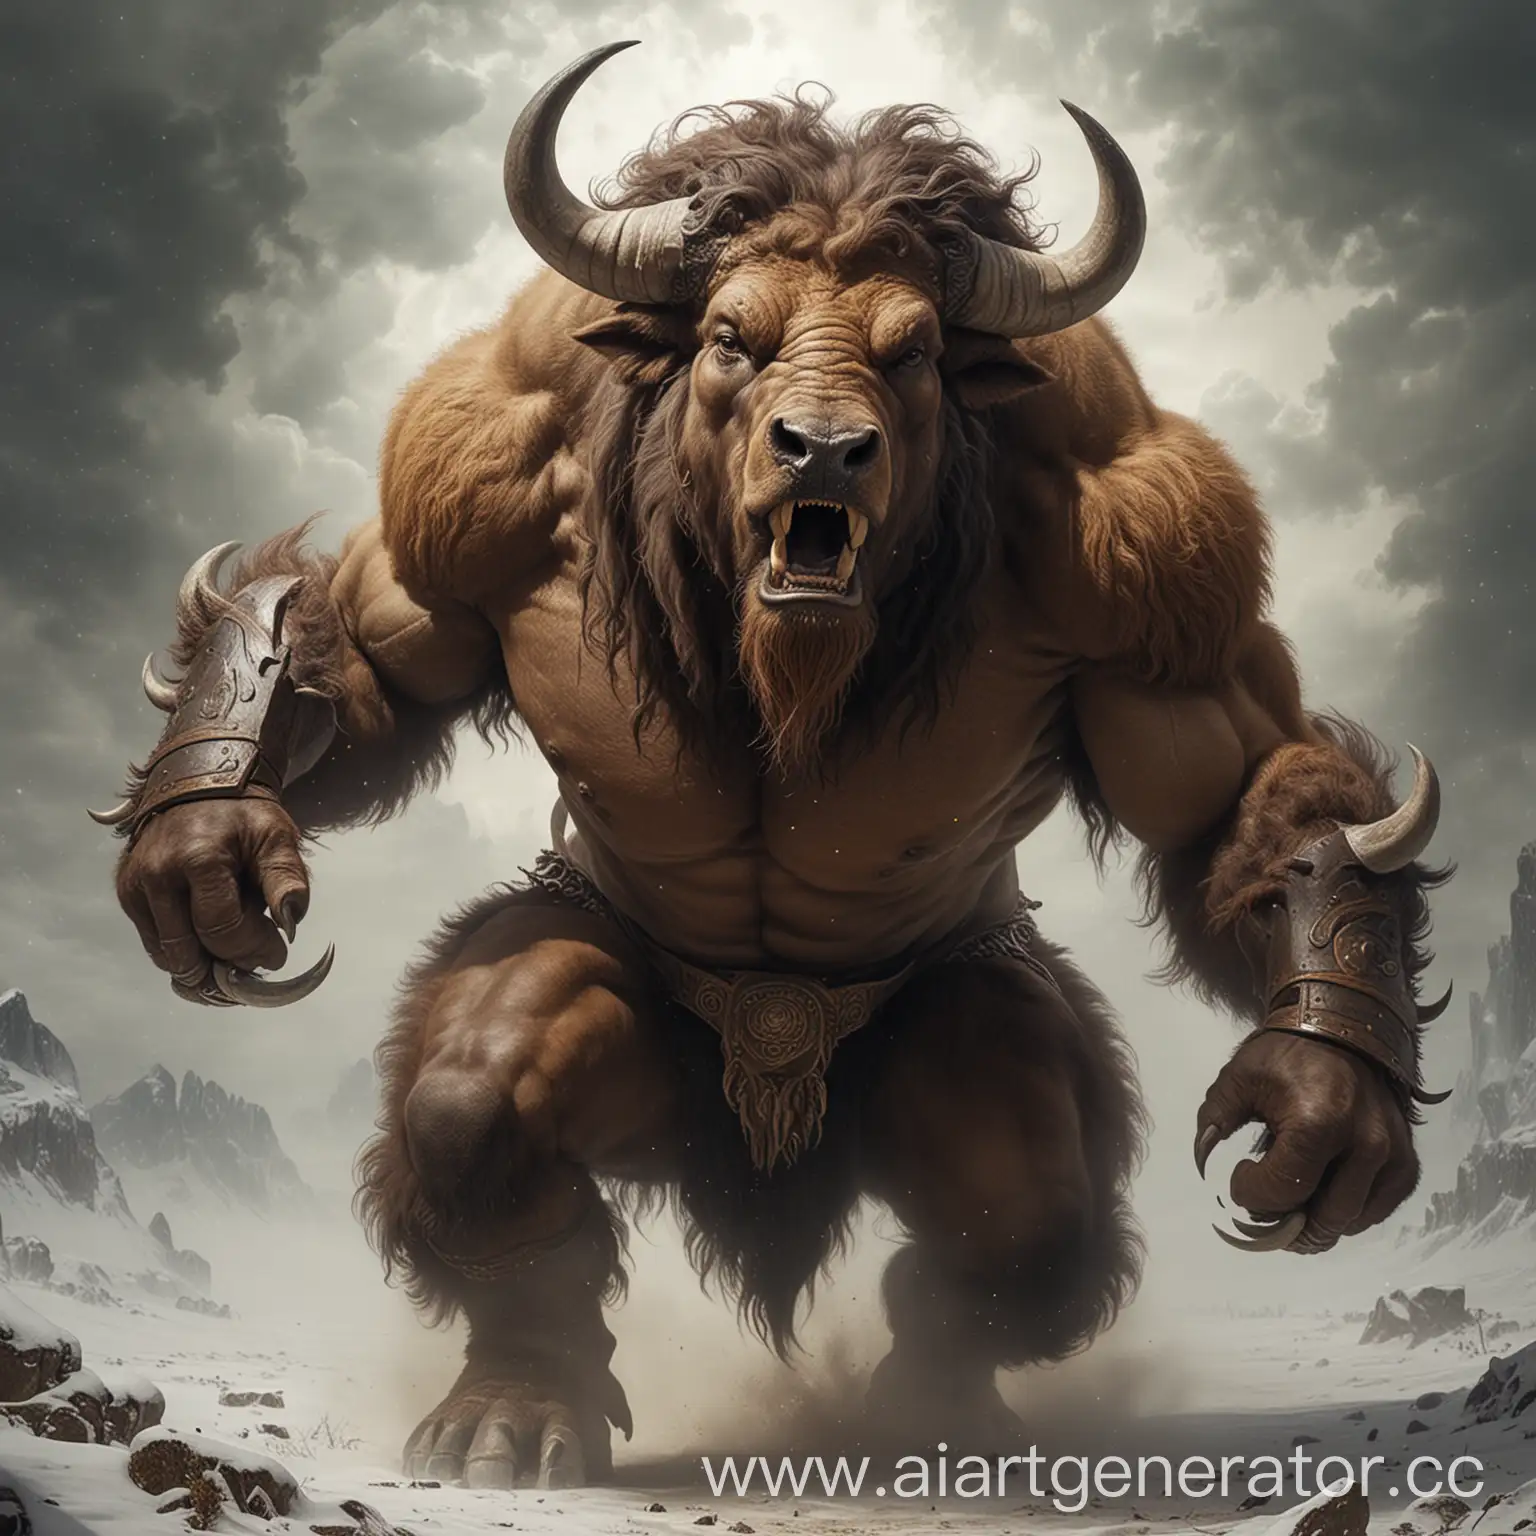 Furious-Minotaur-with-Bison-Head-in-Ancient-Mythological-Scene